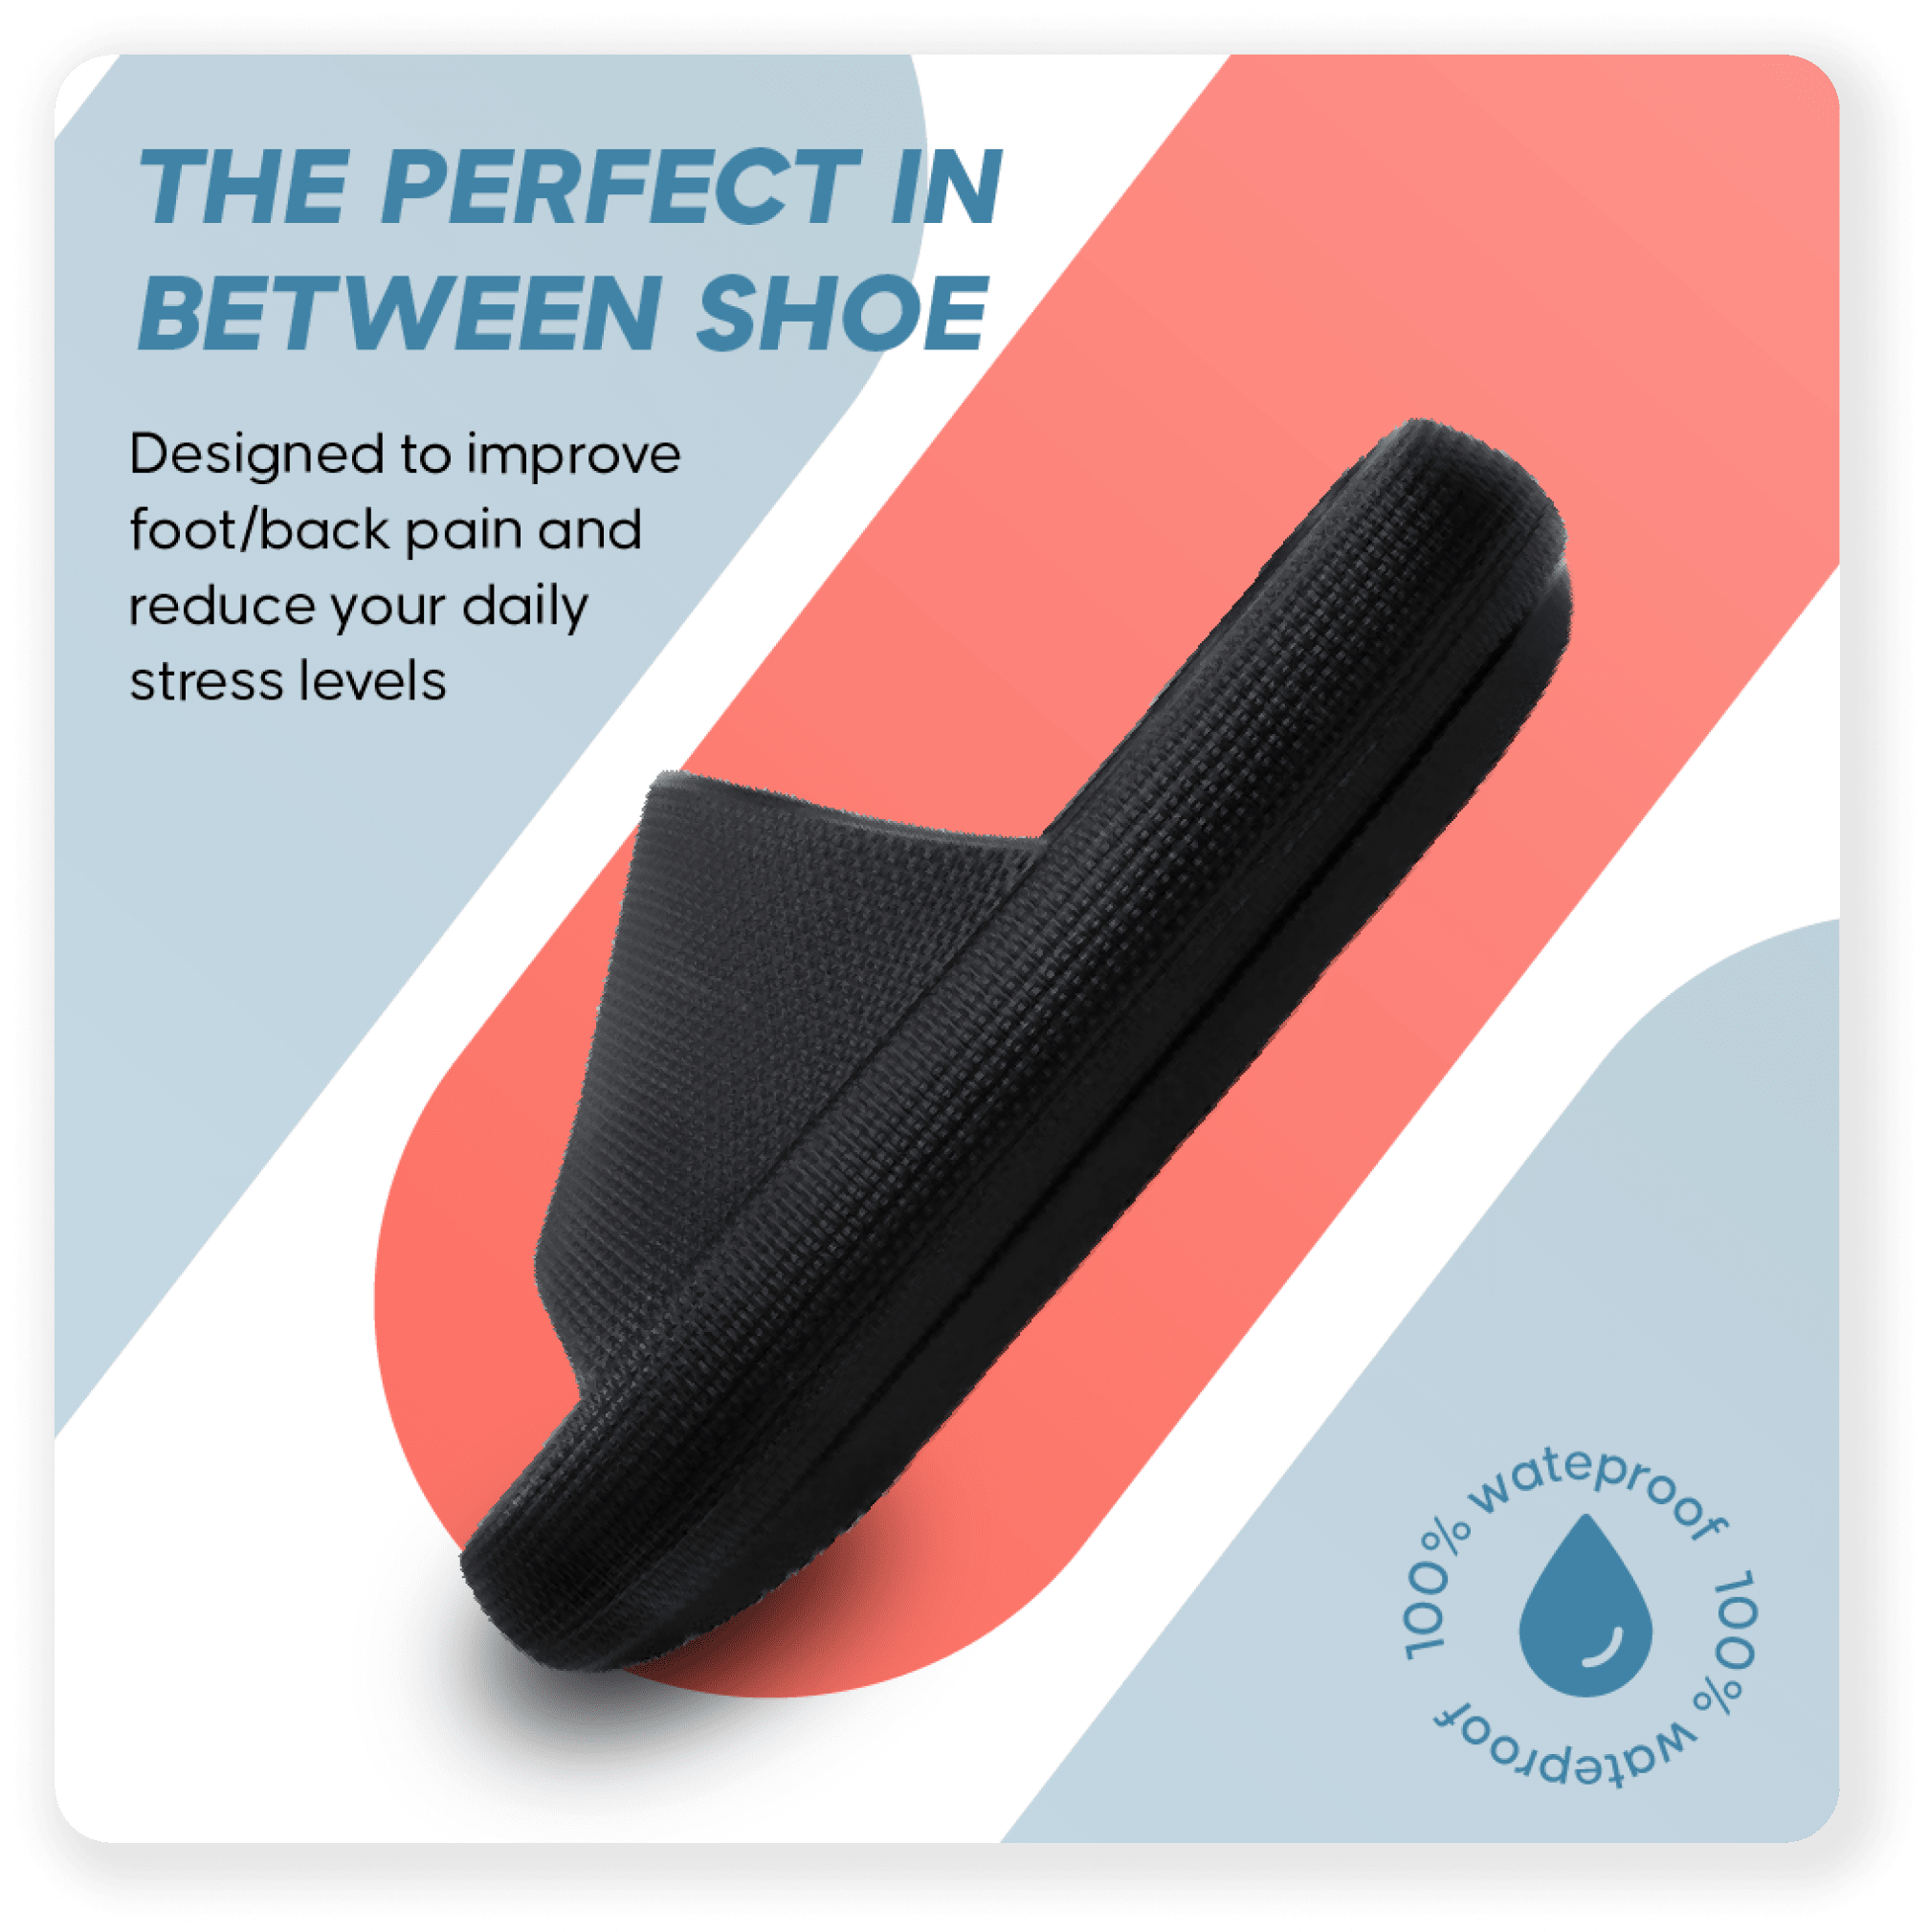 Slipper’s advertising featuring benefits of the design. Reduce your daily stress level.